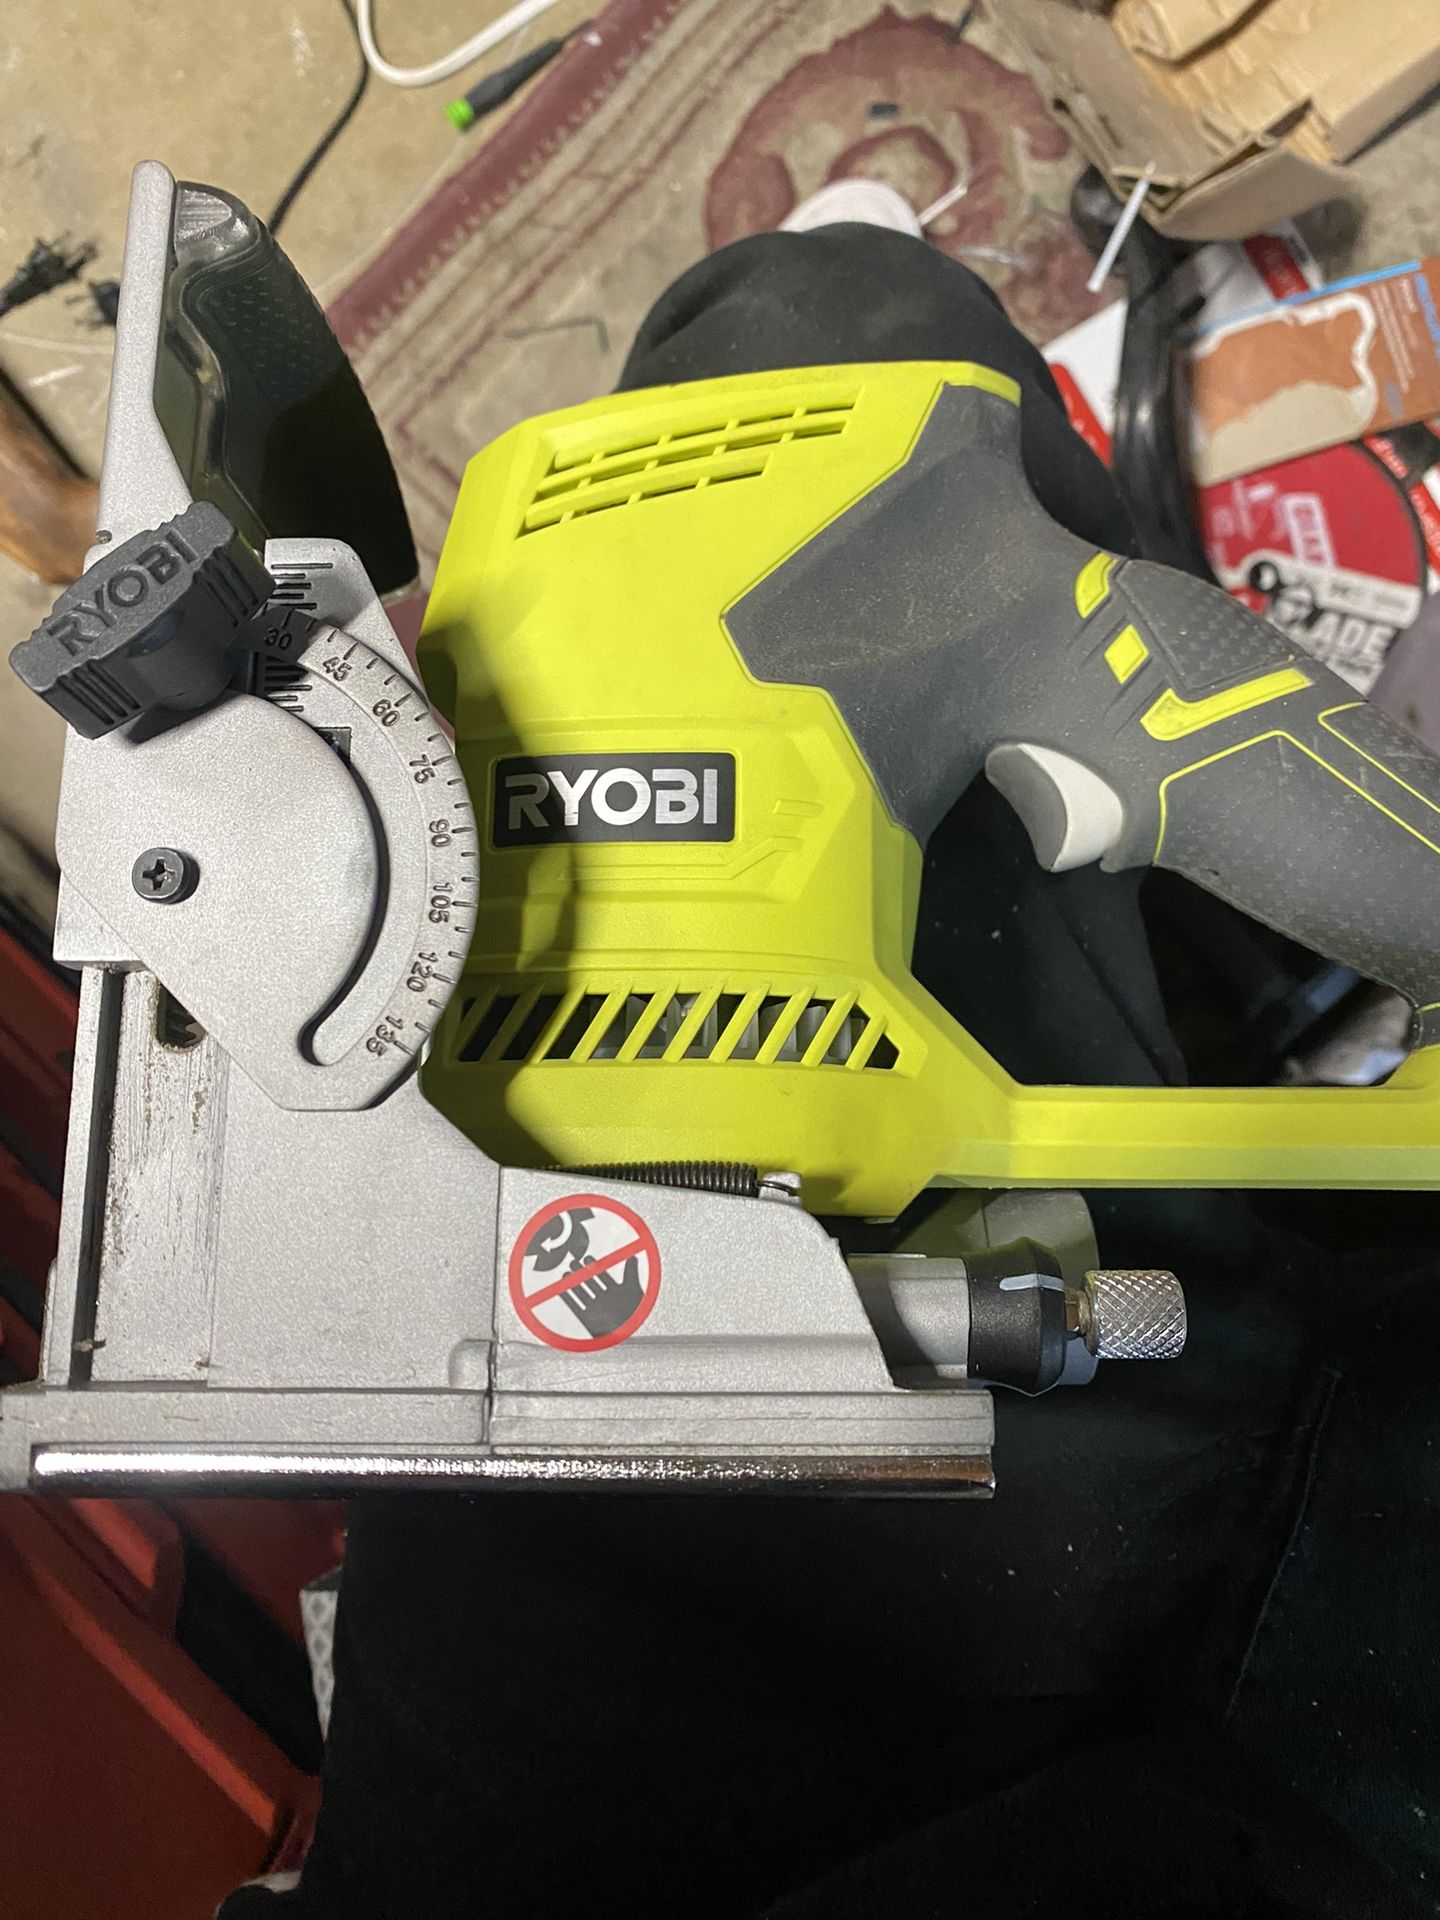 RYOBI 6 Amp Corded AC Biscuit Joiner 